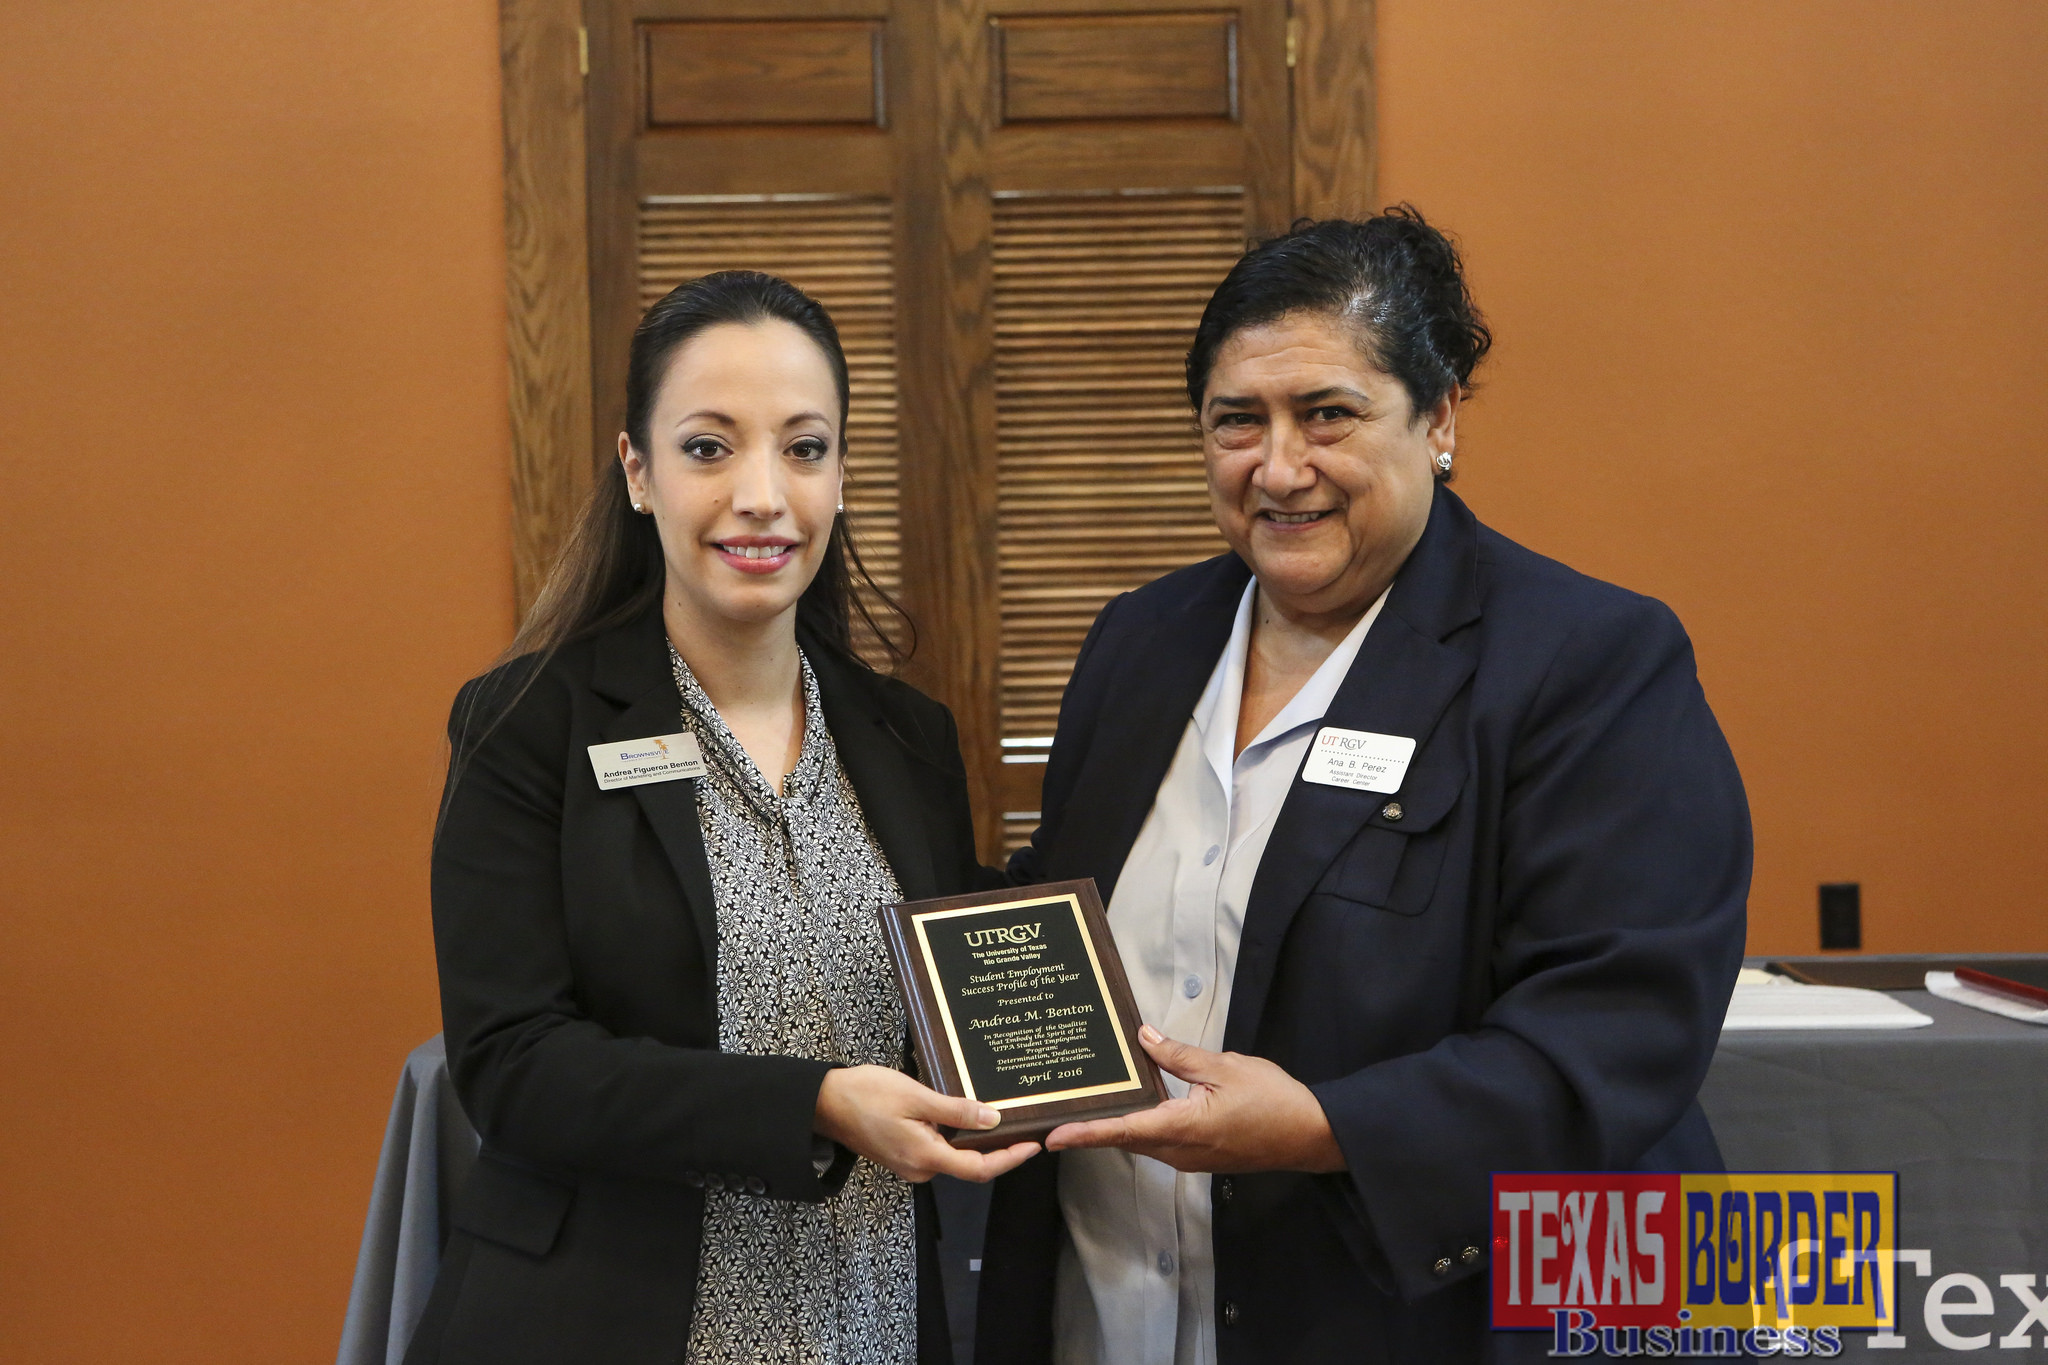 UTRGV student Kathy Alison Gómez was named Student Employee of The Year for the Brownsville Campus, during an appreciation luncheon on Friday, April 15, 2016. She is shown here with Ana Perez, assistant director for Student Employment at UTRGV. (UTRGV Photo by Veronica Gaona)